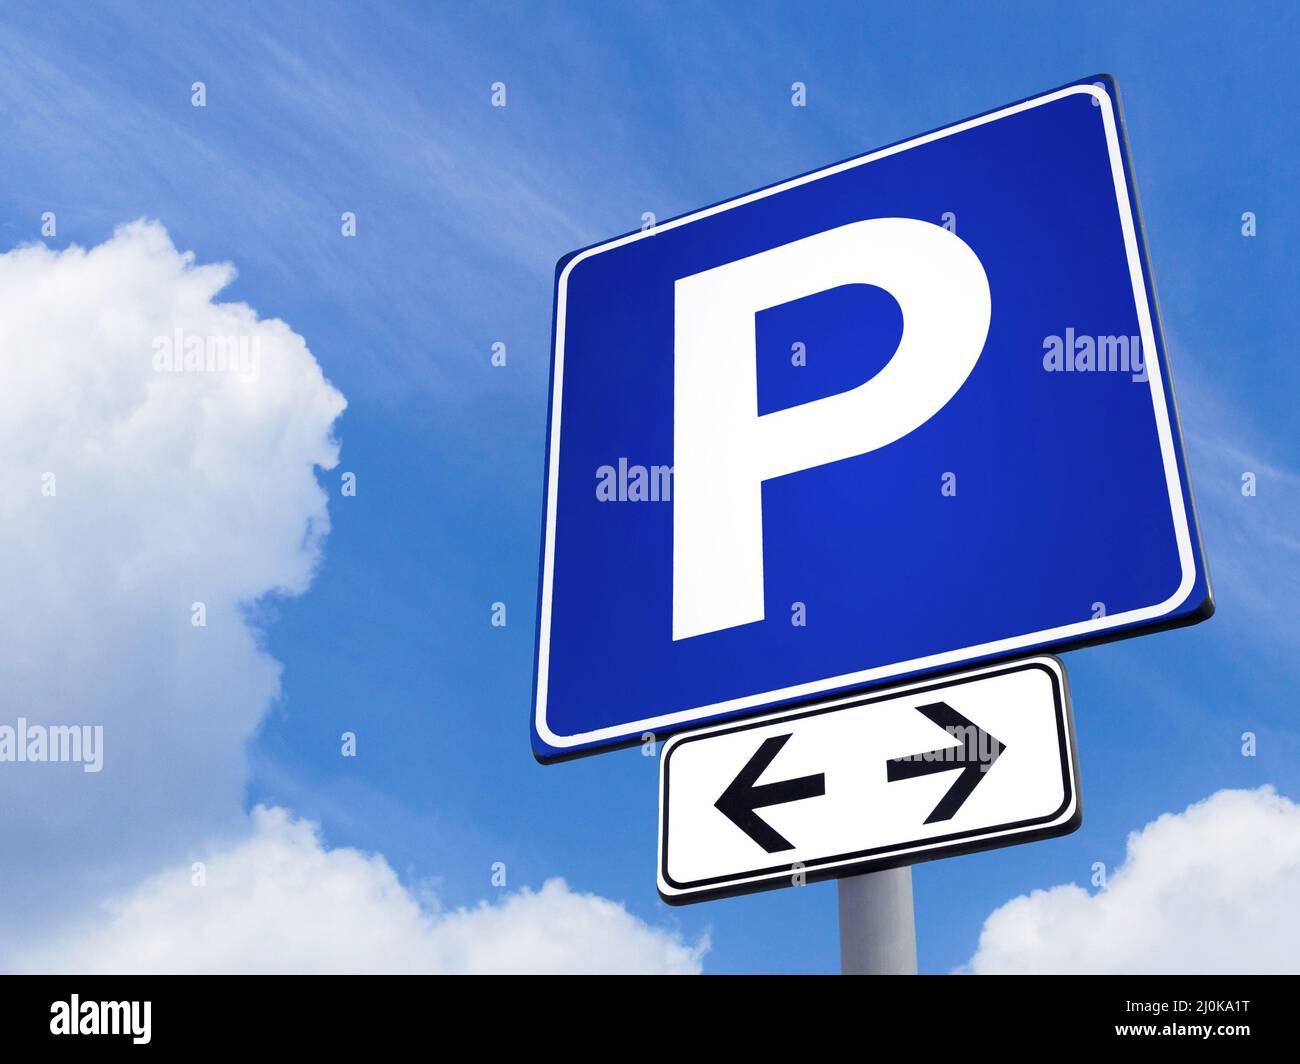 Parking signal with cloudy sky Stock Photo